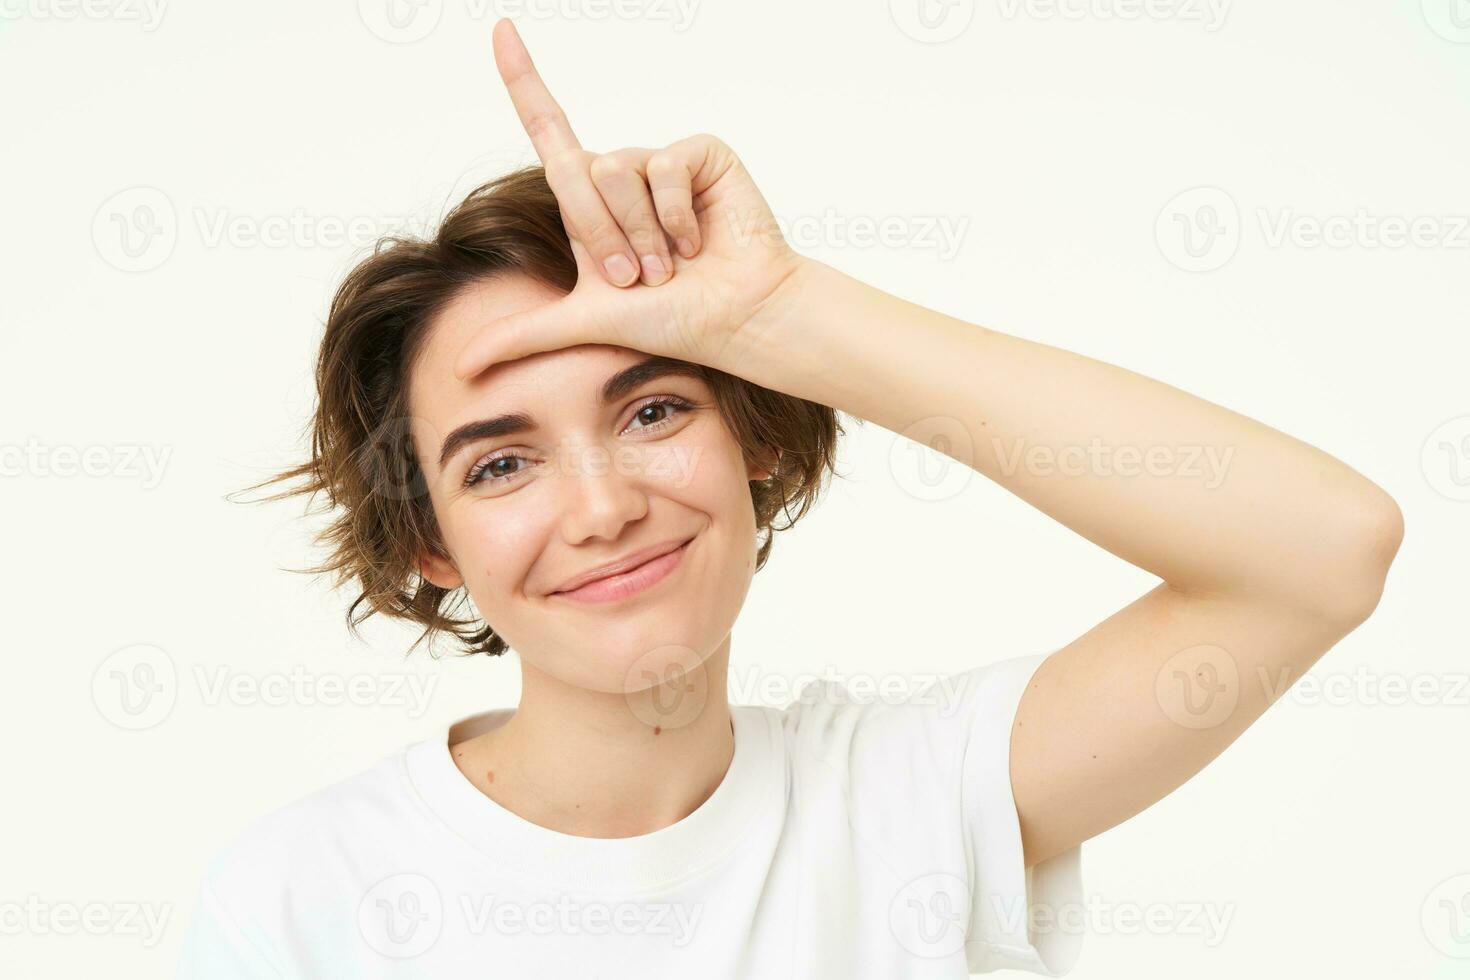 Close up of young woman making fun of friend, smiling and showing loser gesture, l letter on forehead, standing over white background photo